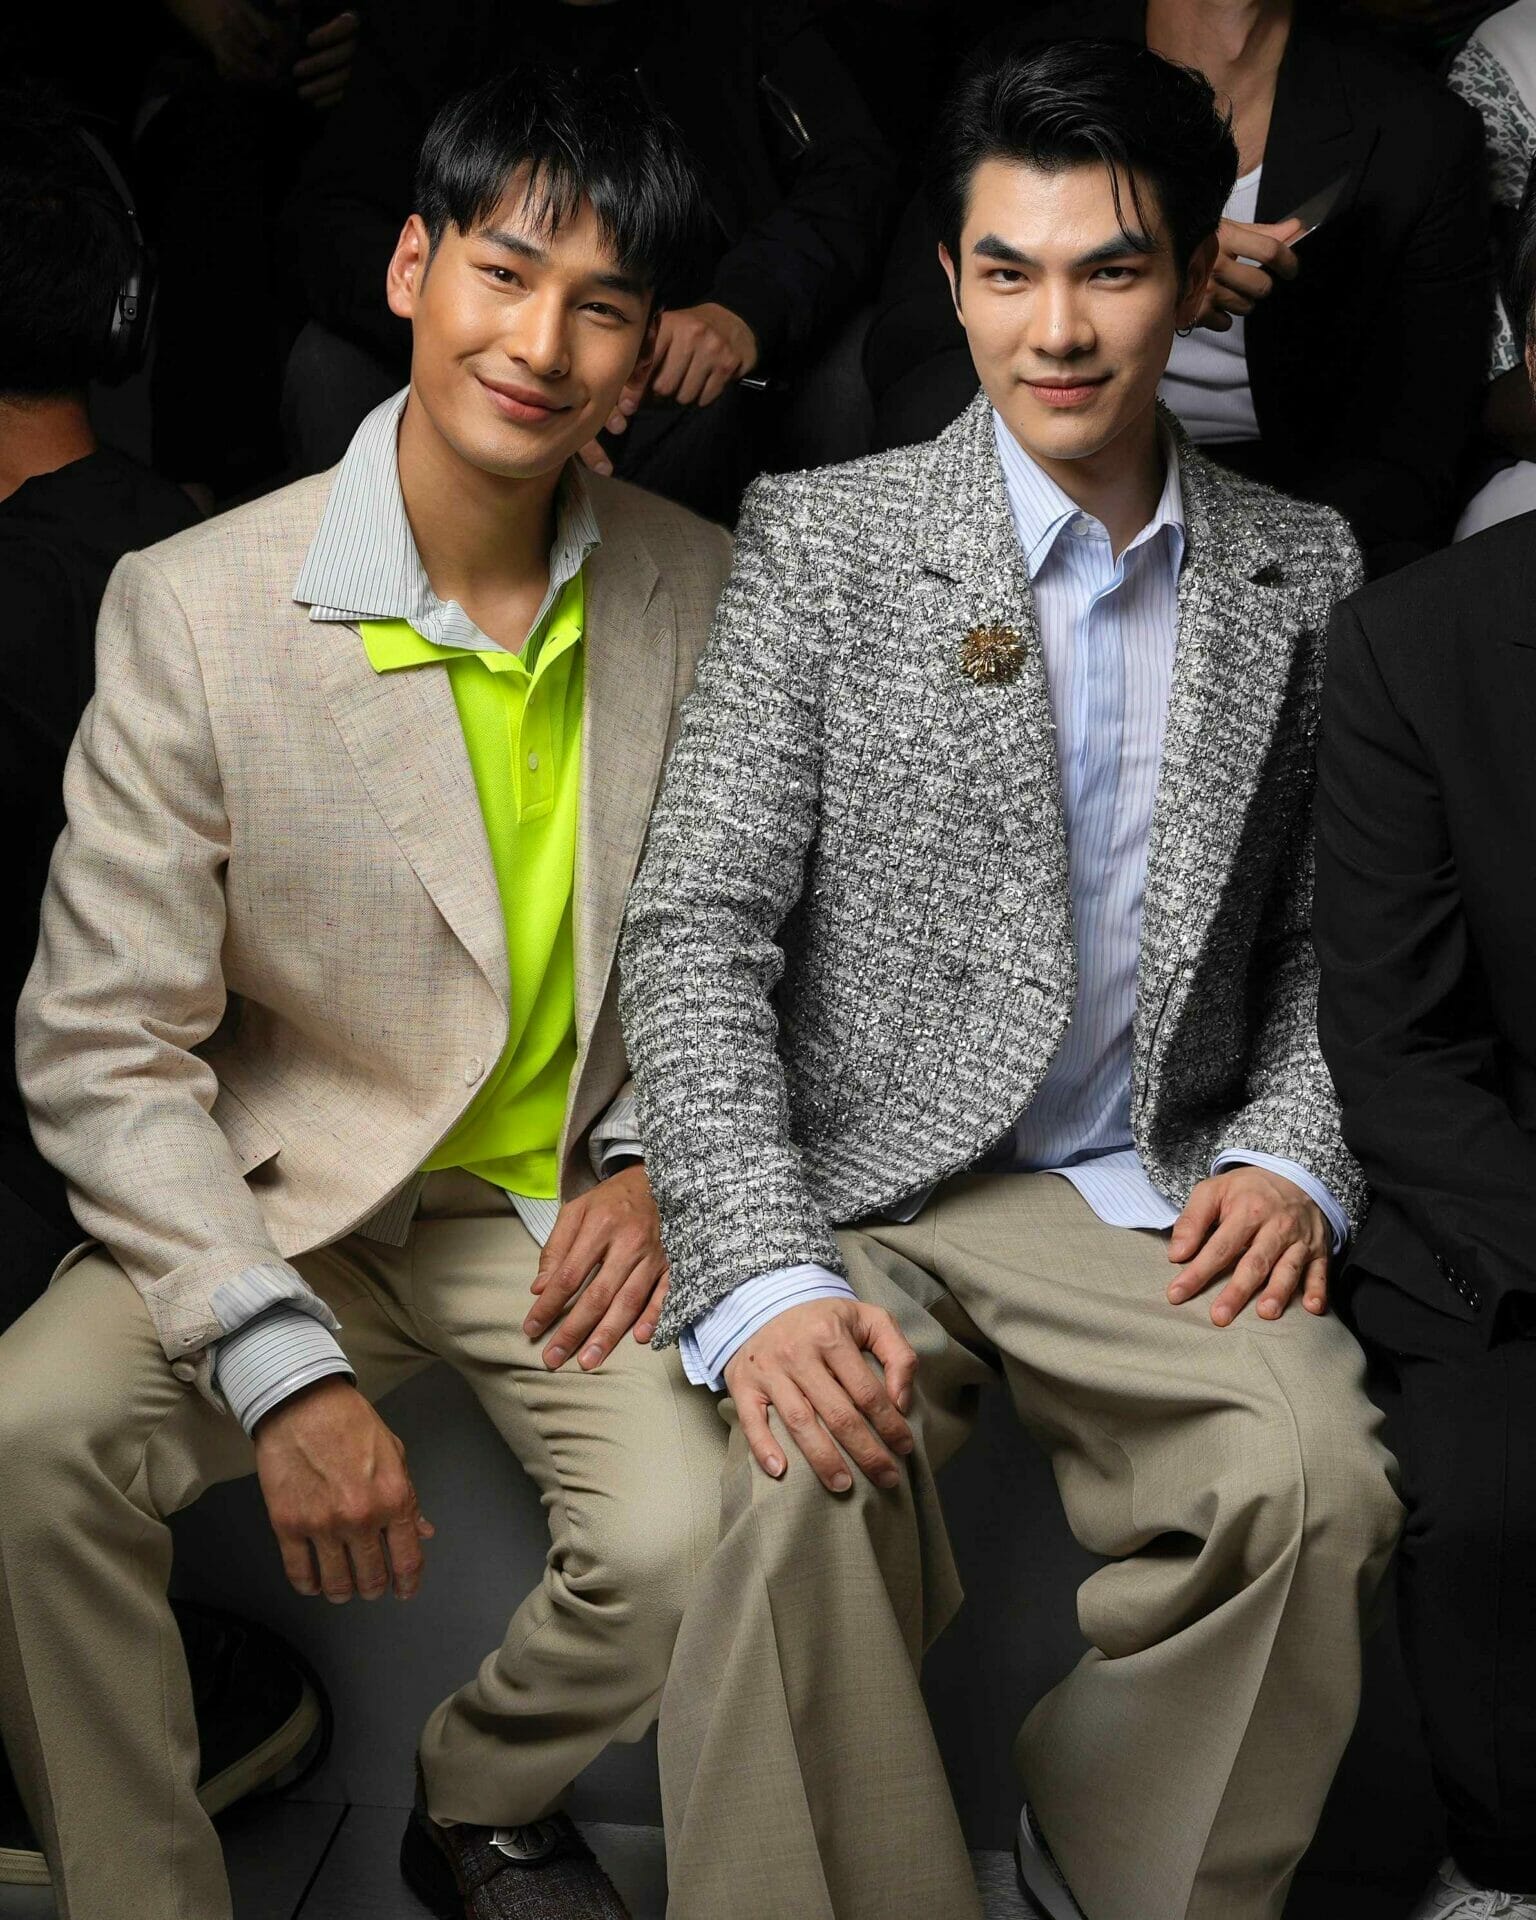 Apo Nattawin Wattanagitiphat, Mile Phakphum Romsaithong, and Guest at the Dior Homme Spring 2024 Menswear Collection Runway Show